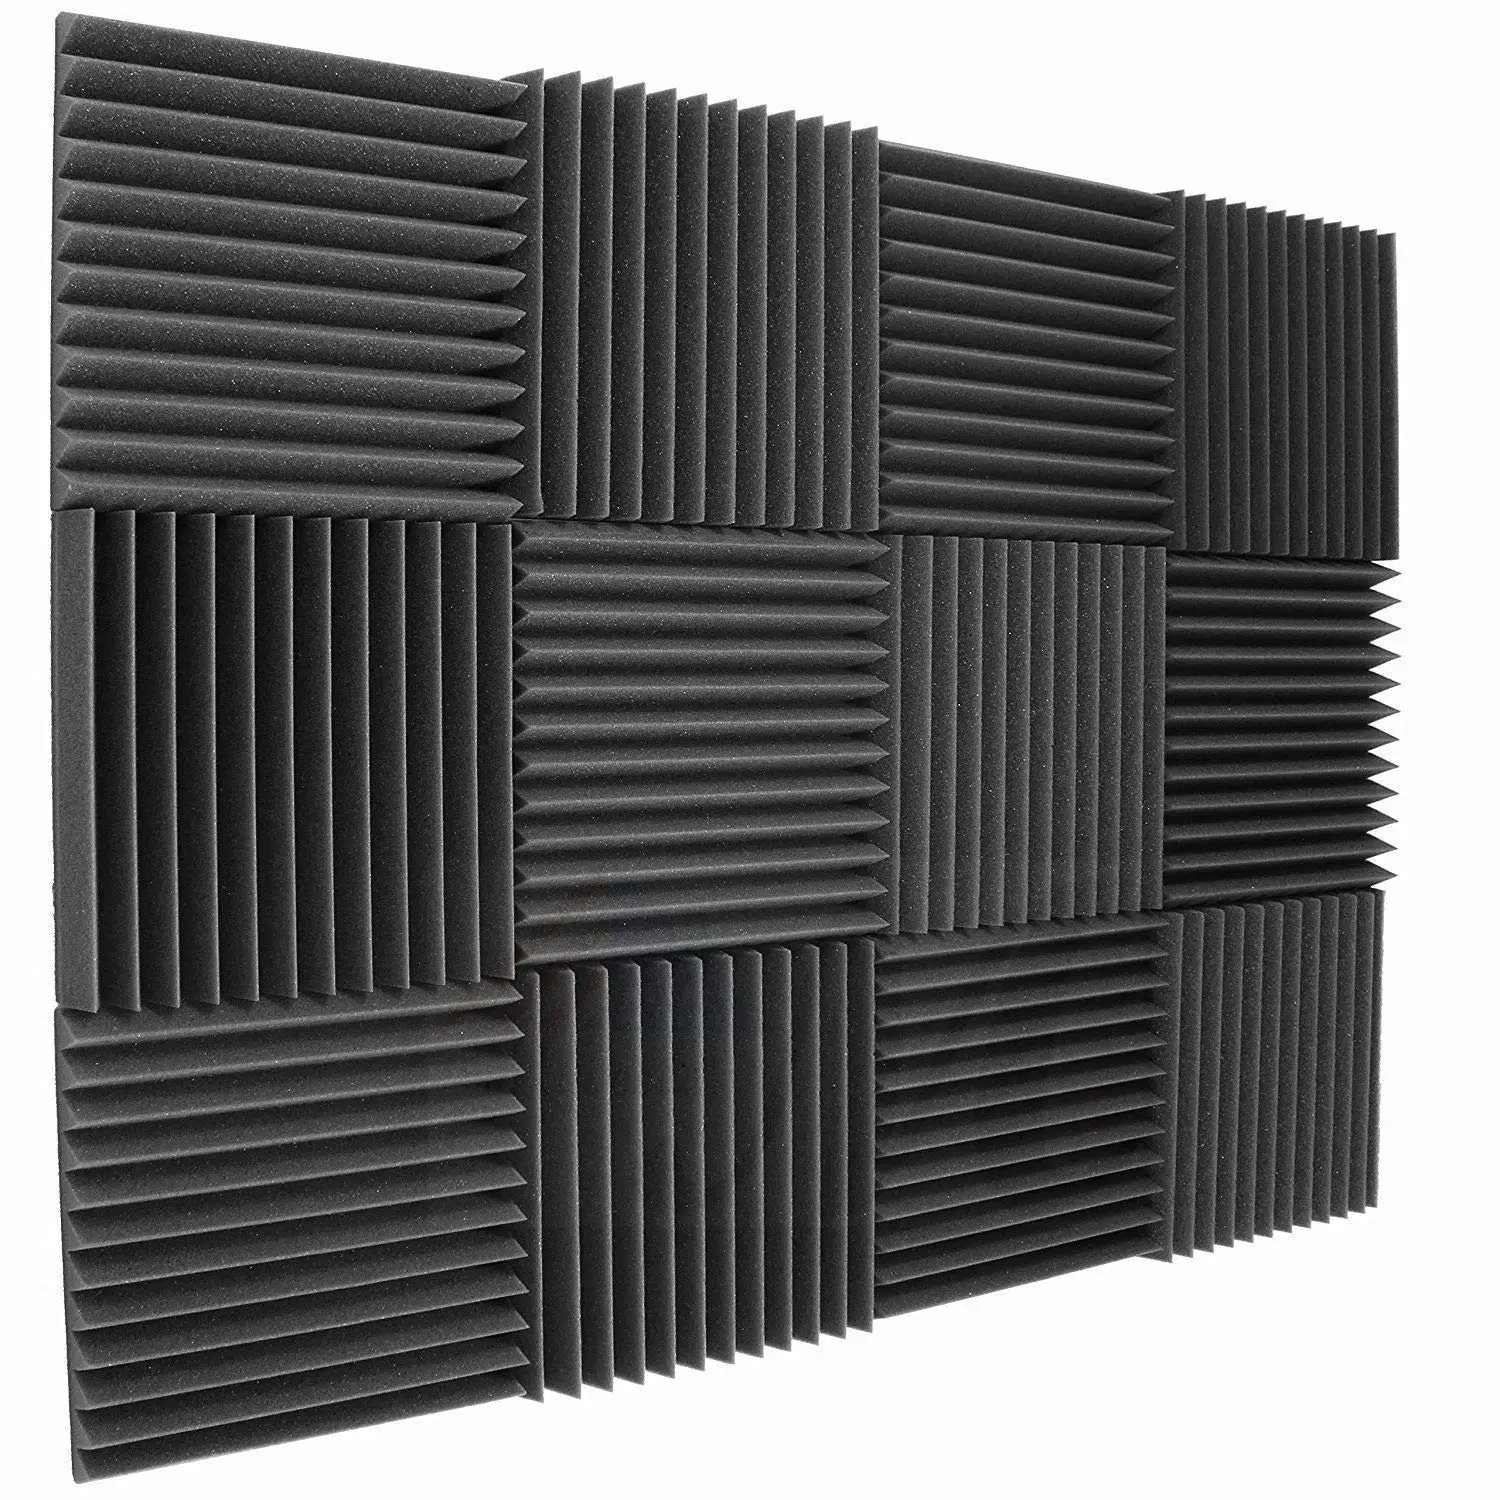 Cheap Outdoor Soundproofing Panels, find Outdoor Soundproofing Panels